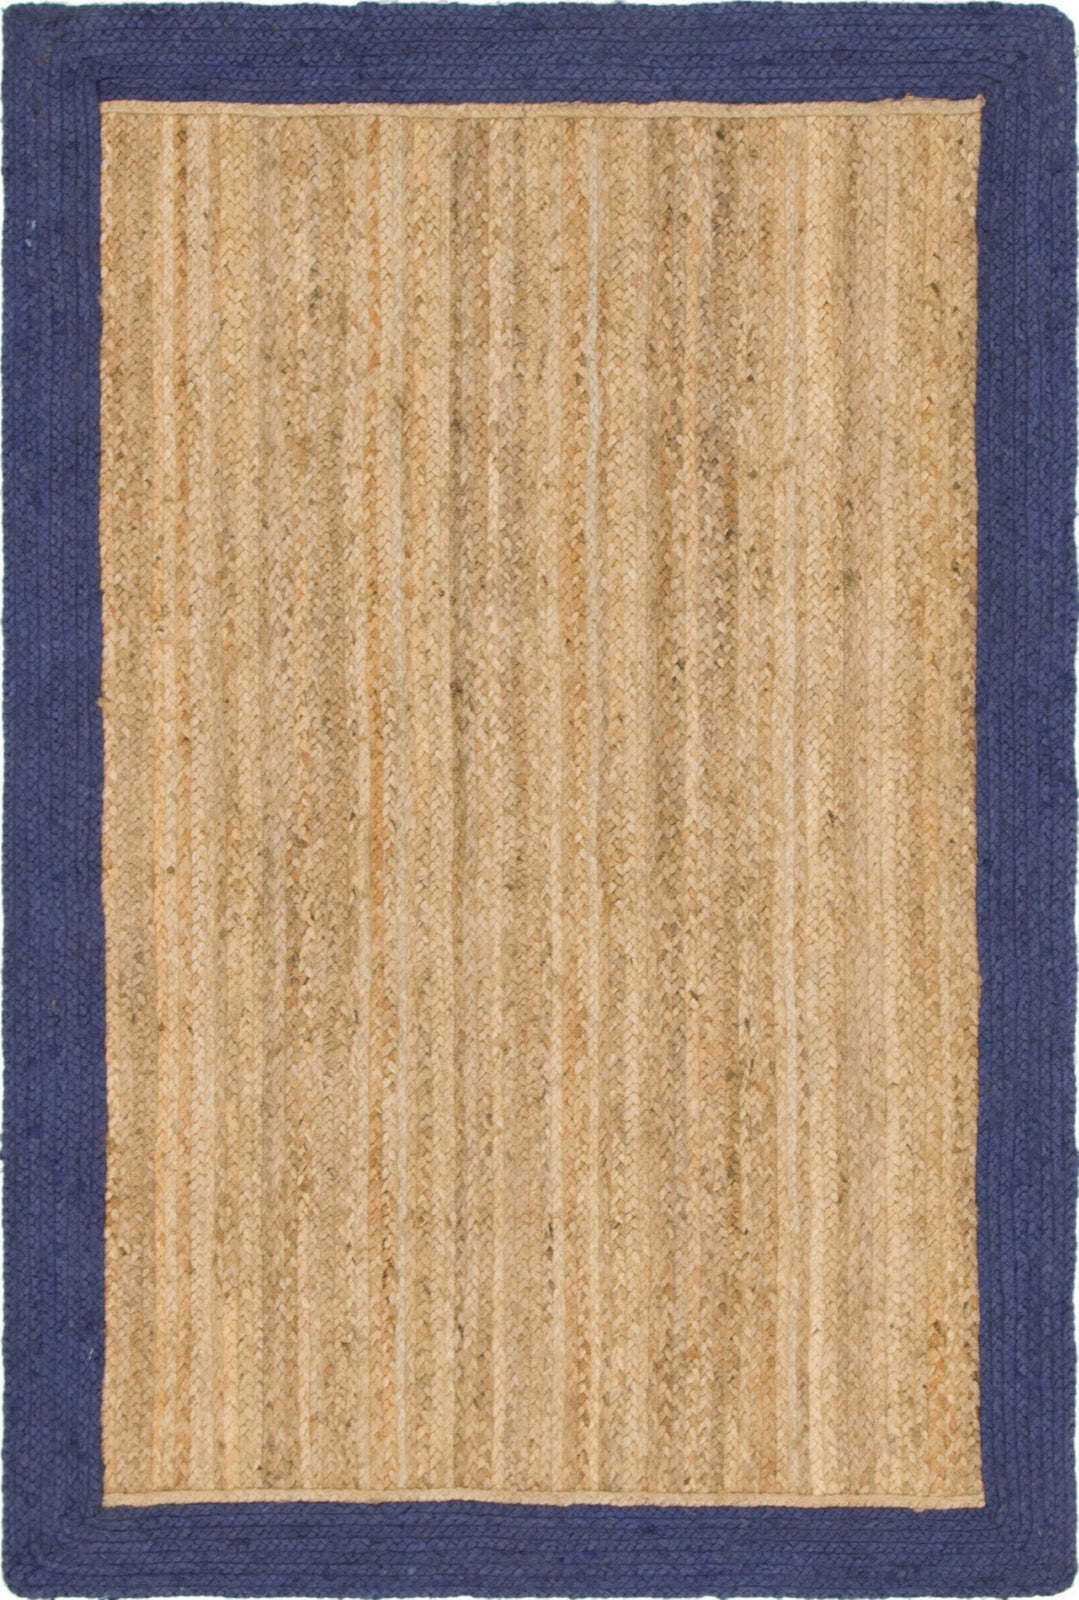 Unique Loom Braided Jute MGN-4 Natural Area Rug main image